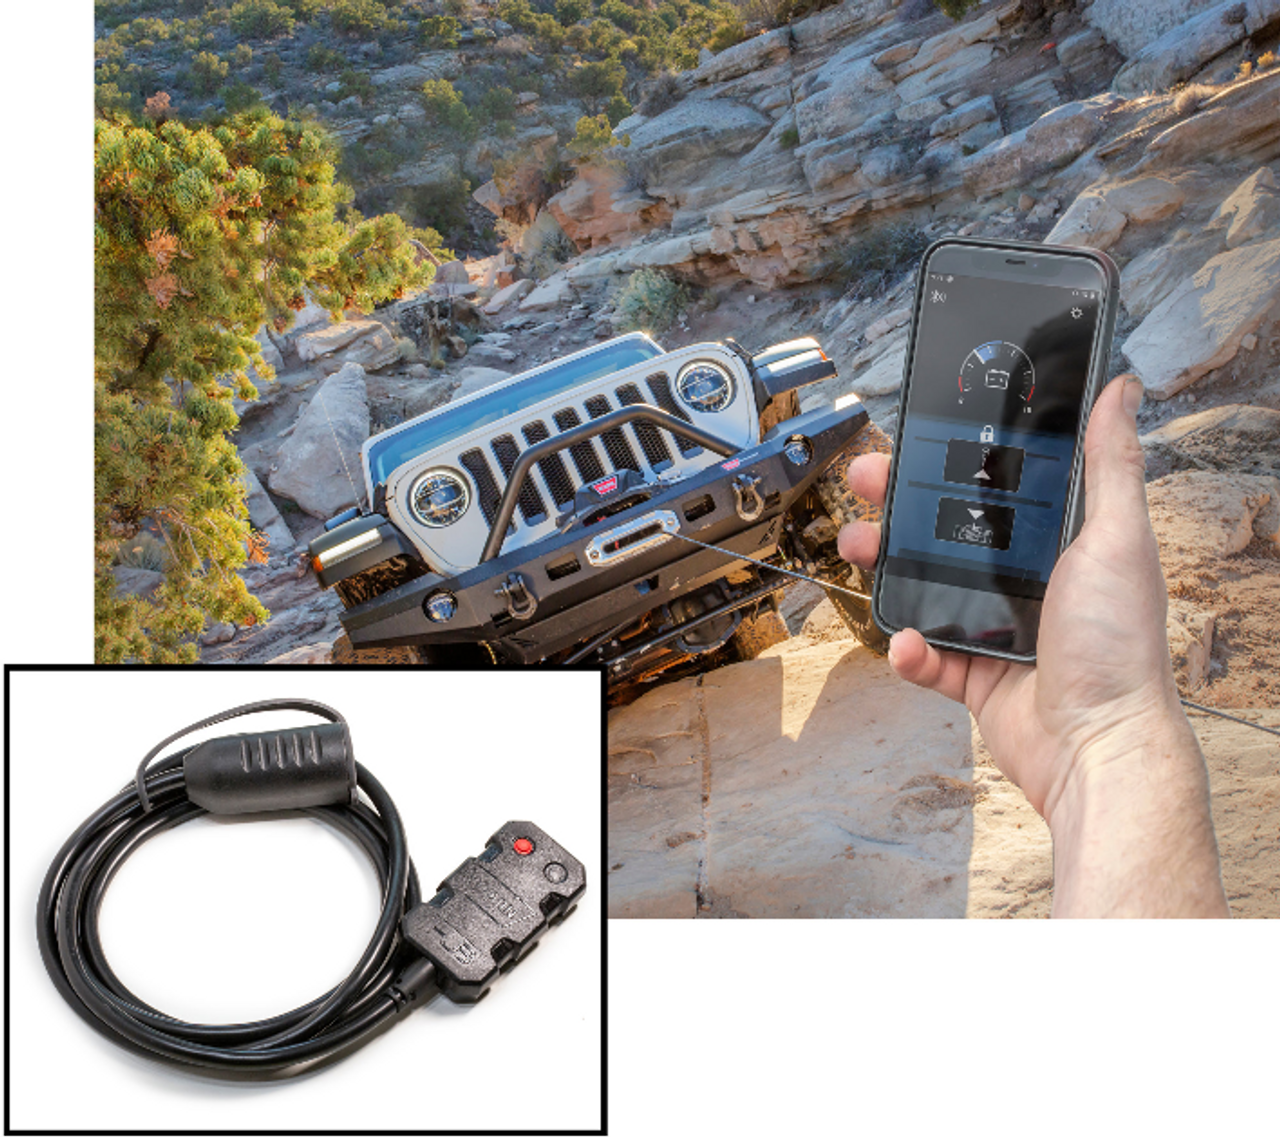 WARN 103955 HUB Wireless Receiver- Smart Phone Enabled Winch Controller for Smittybilt & Other Winches